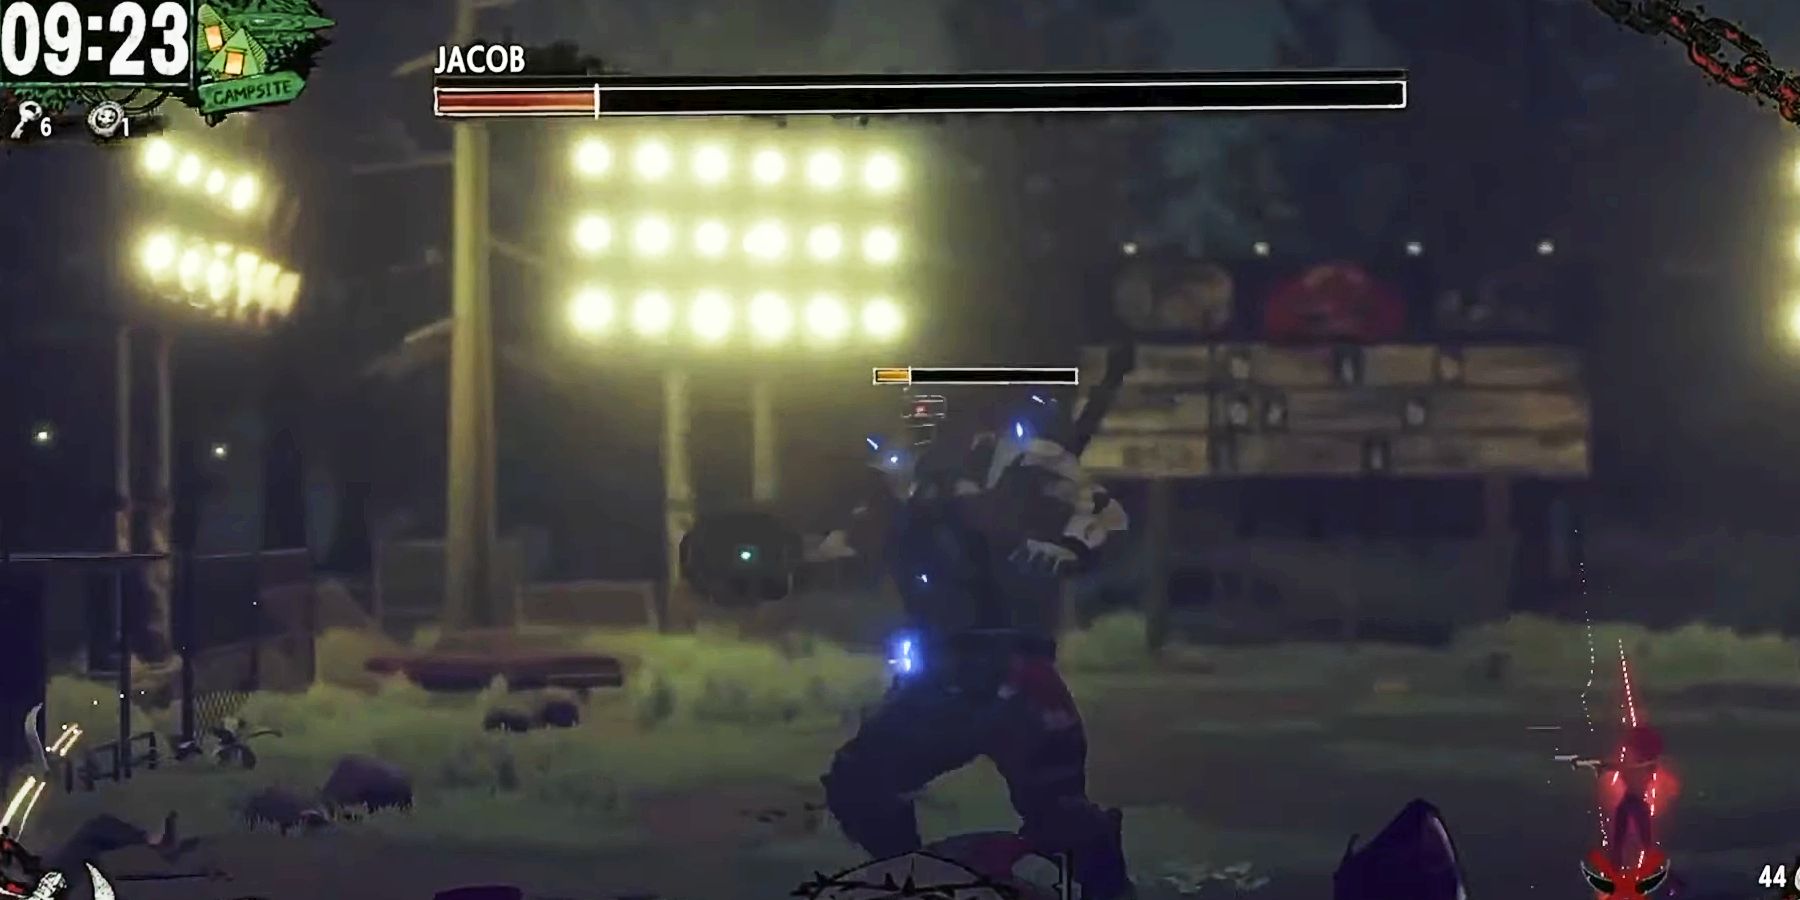 Jacob, a giant, muscular man in football mask and wielding a spiked bat, takes the field in a screenshot from Hotel Barcelona.